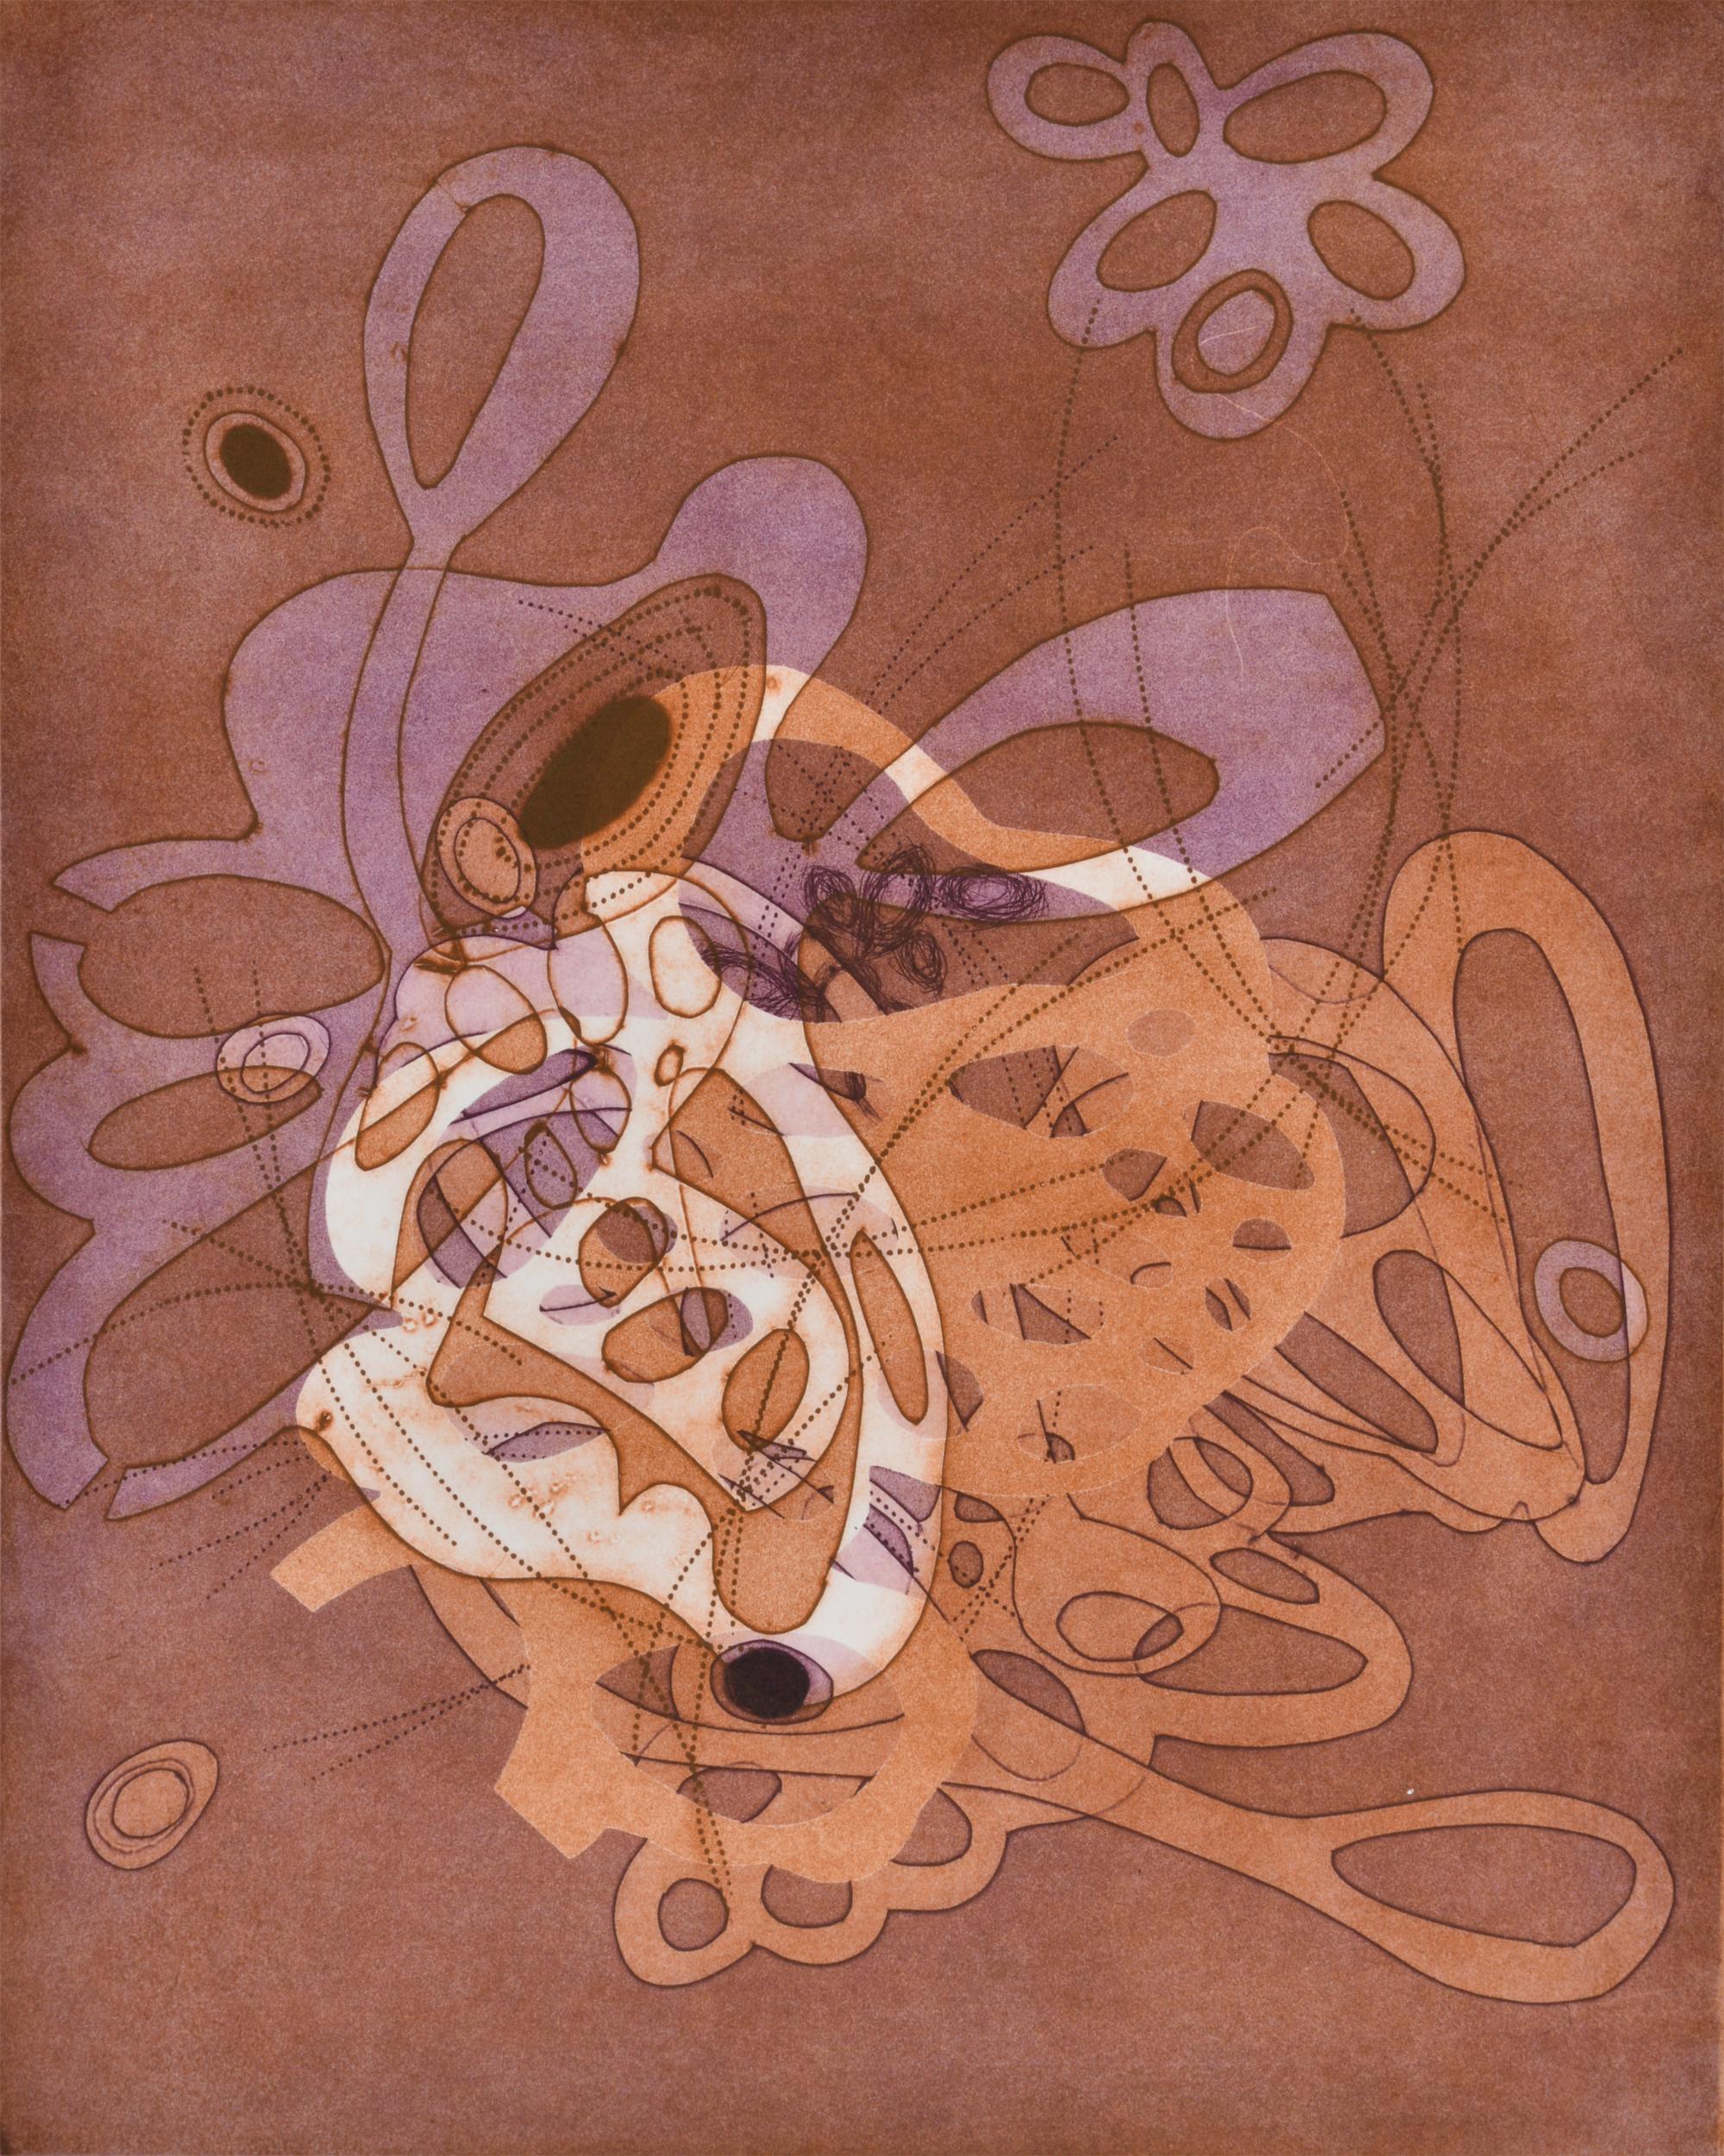 Taiko Chandler Abstract Print - "On and On #21", Delicate pastel colored organic, curvy abstract monoprint